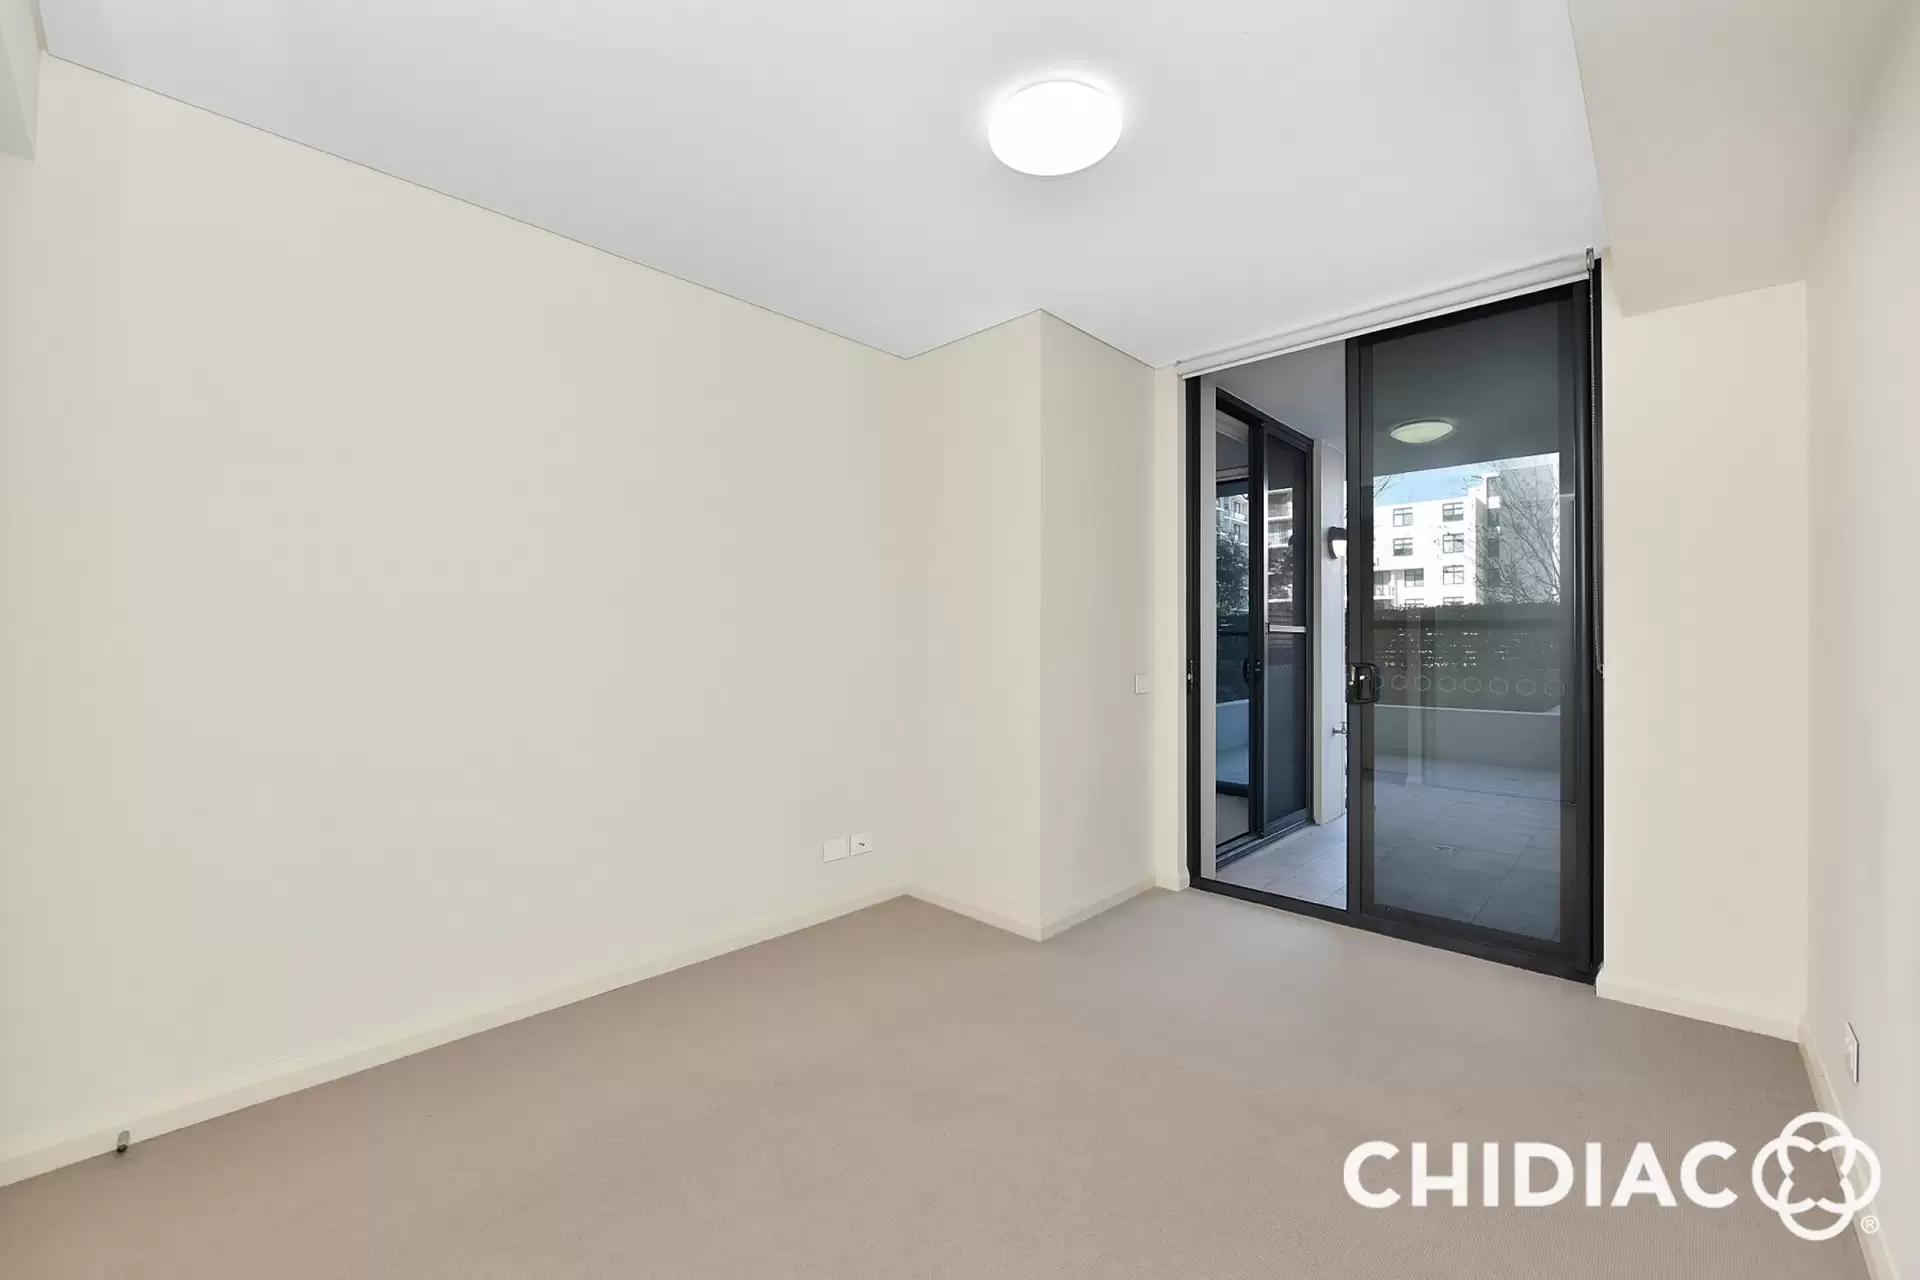 209/48 Amalfi Drive, Wentworth Point Leased by Chidiac Realty - image 1